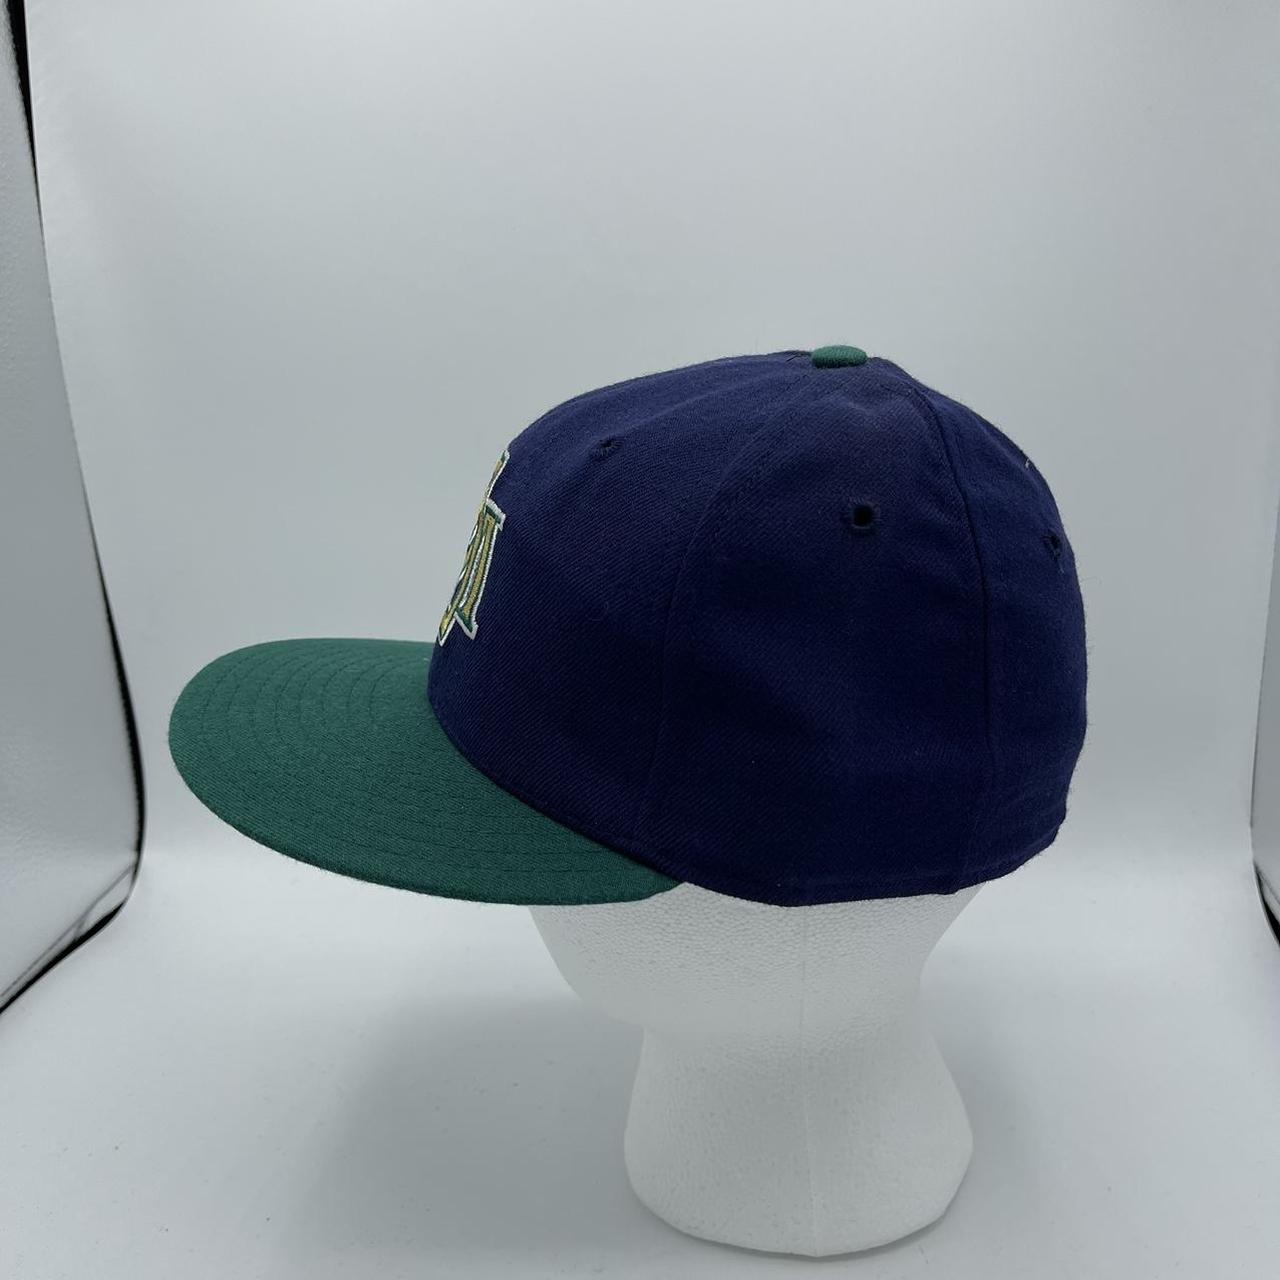 MILWAUKEE BREWERS new era baseball fitted vintage hat 90s hat cap Size 6 3/4